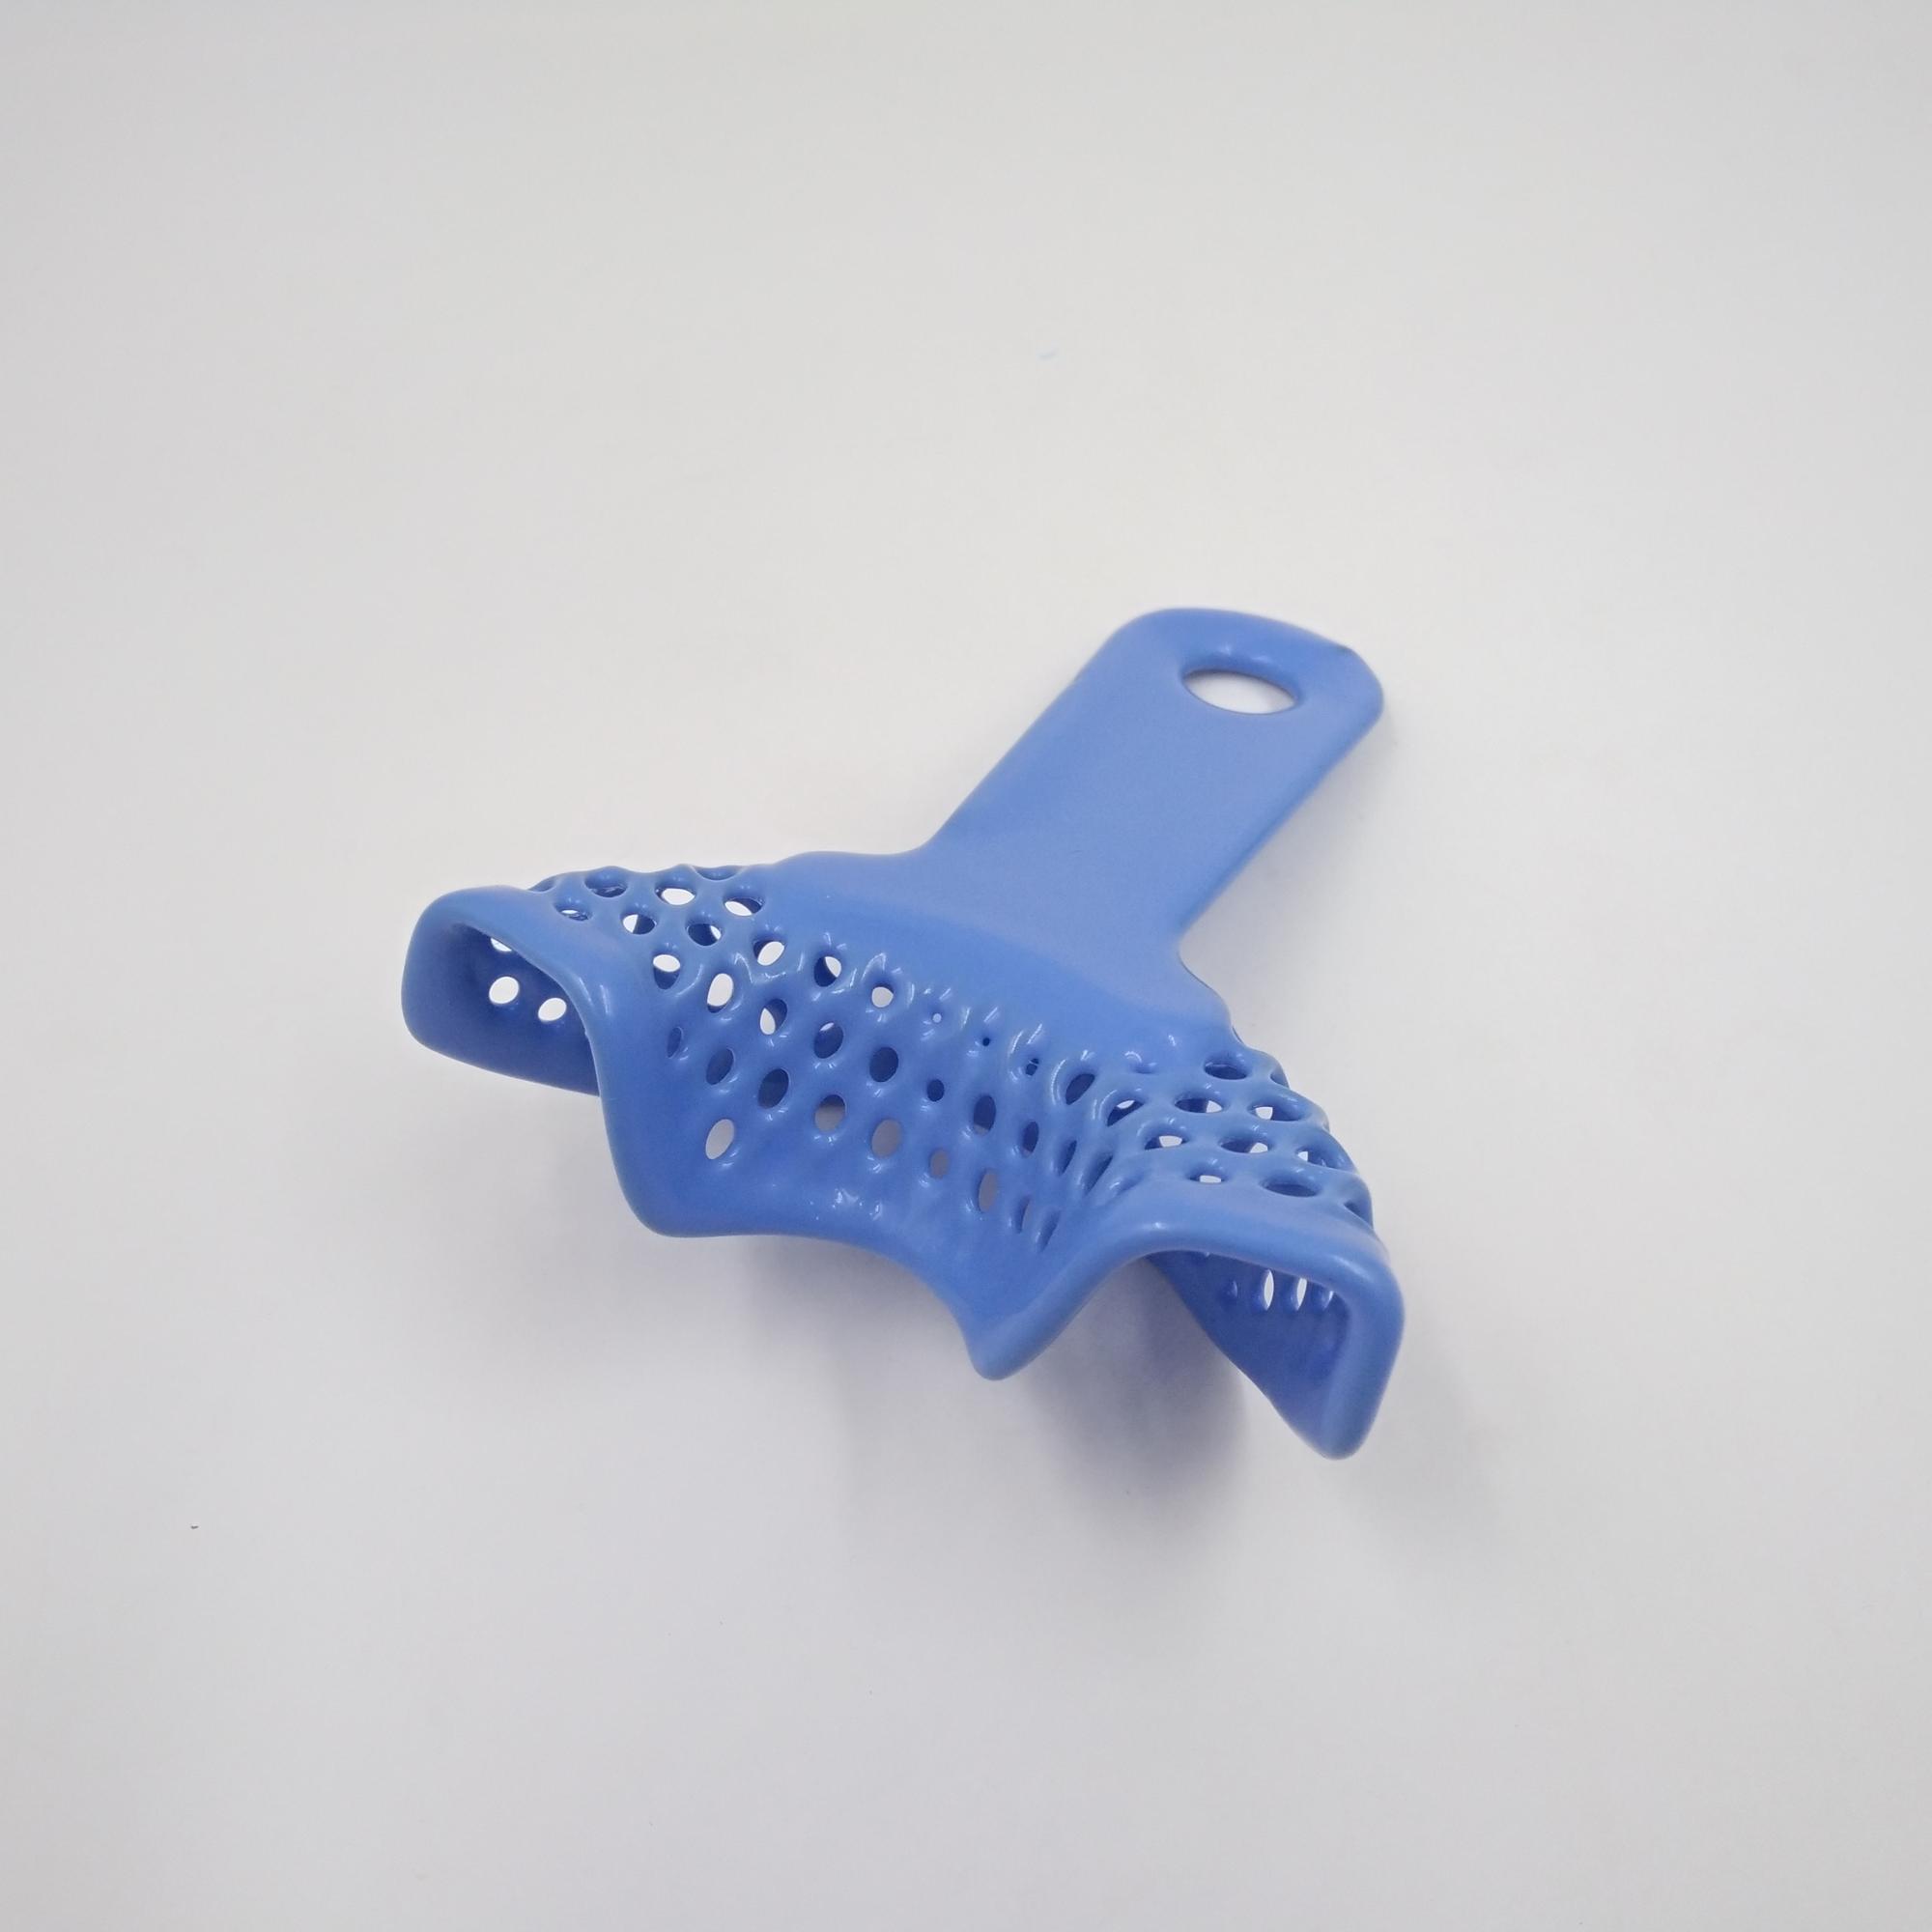 Best product to clean injection molding plastic children custom plastic toy parts